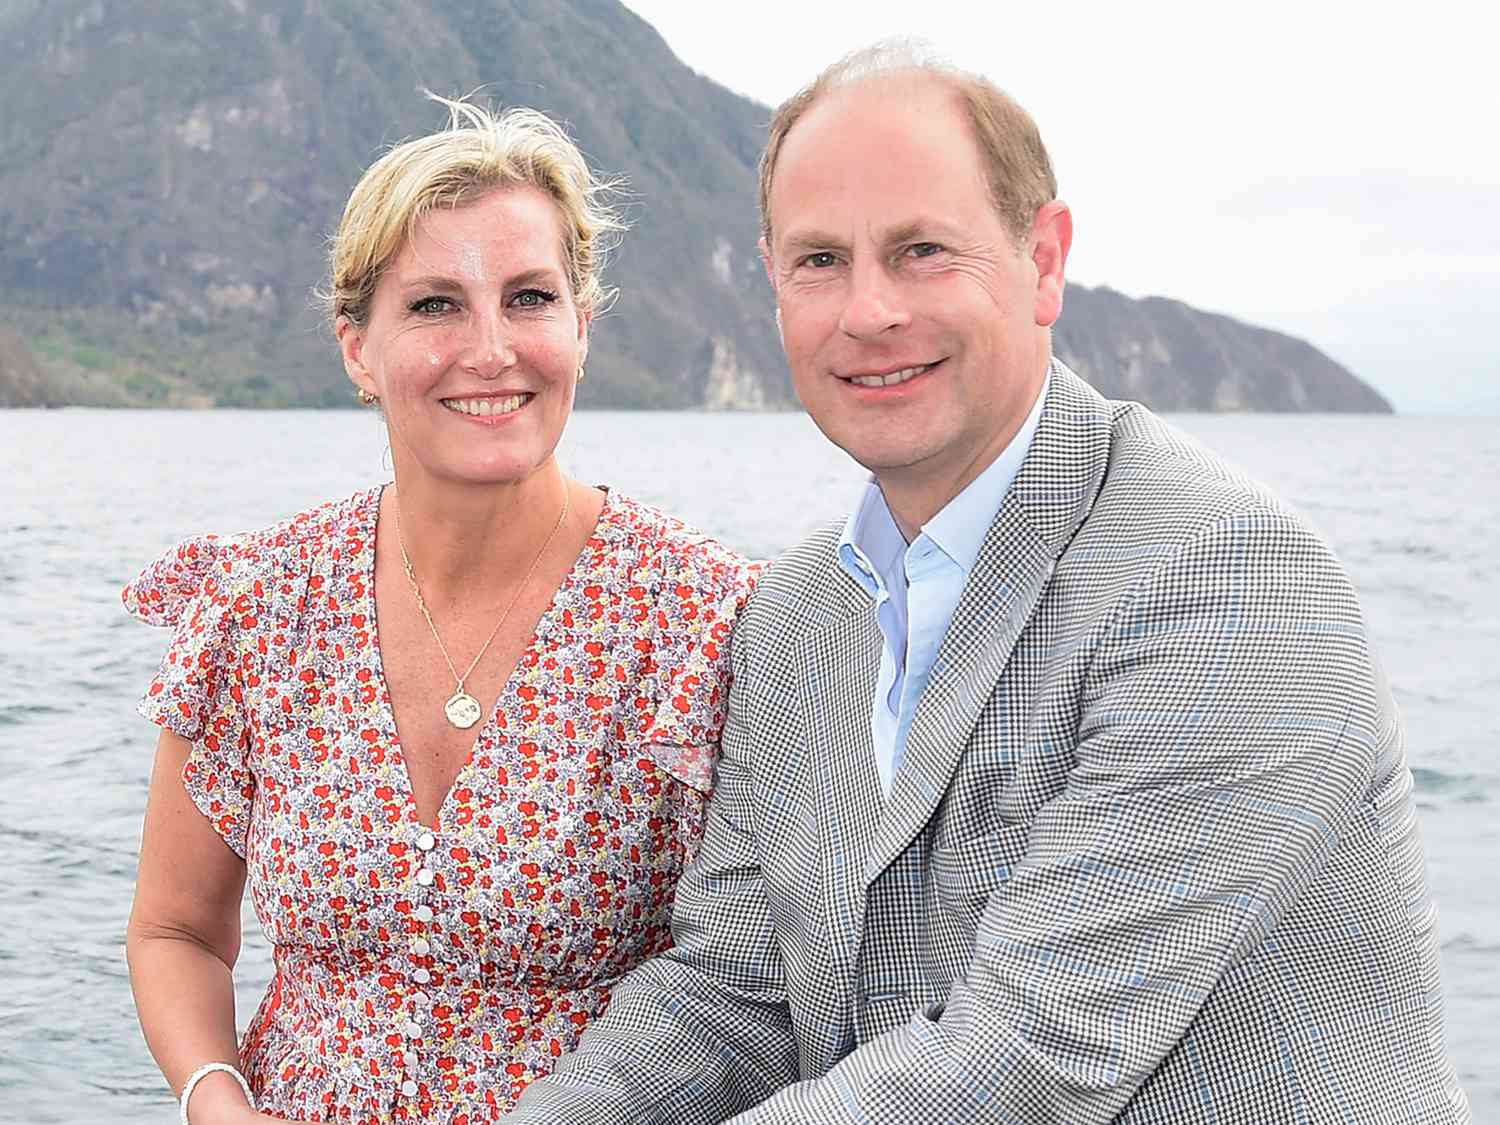 Sophie, Countess of Wessex and Prince Edward, Earl of Wessex on April 27, 2022 in Soufriere, Saint Lucia